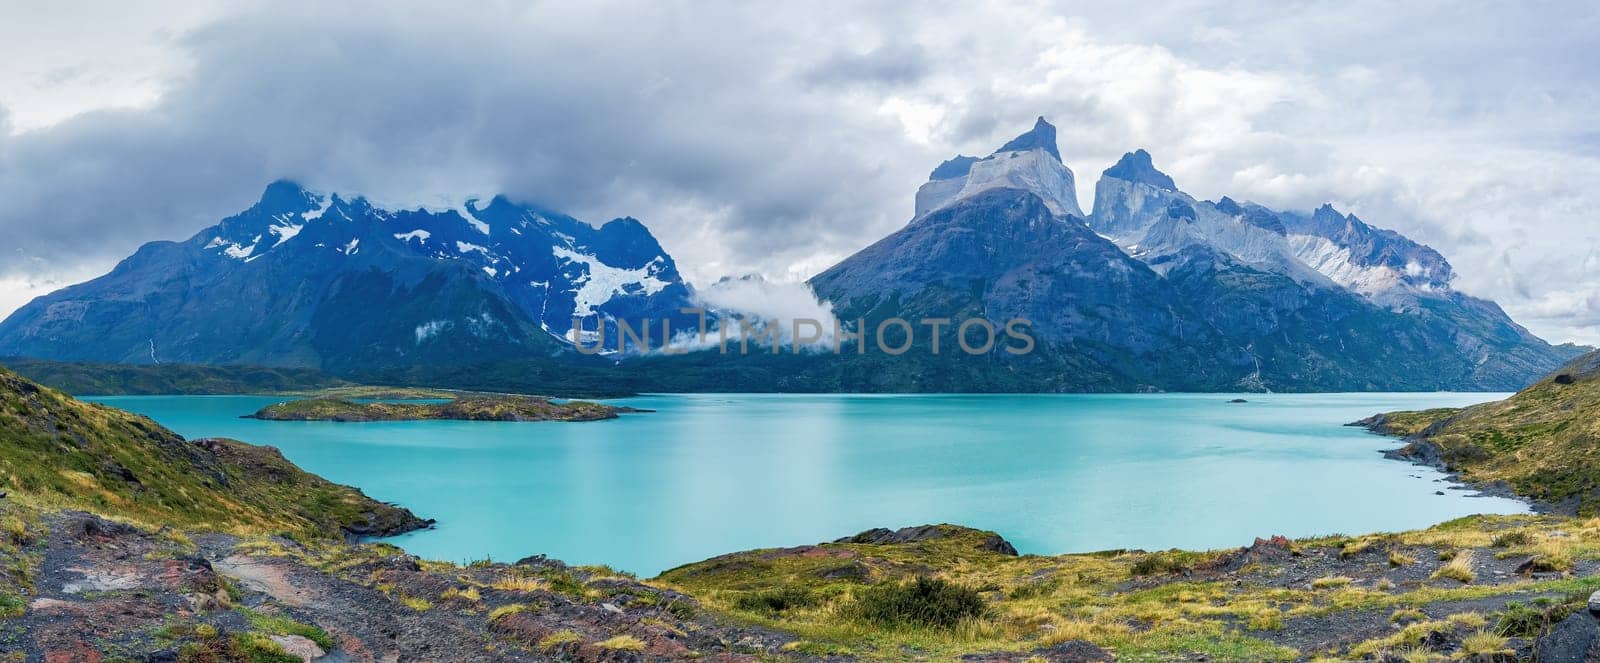 Tranquil panorama with snowy mountains and turquoise lake. Cuernos del Paine